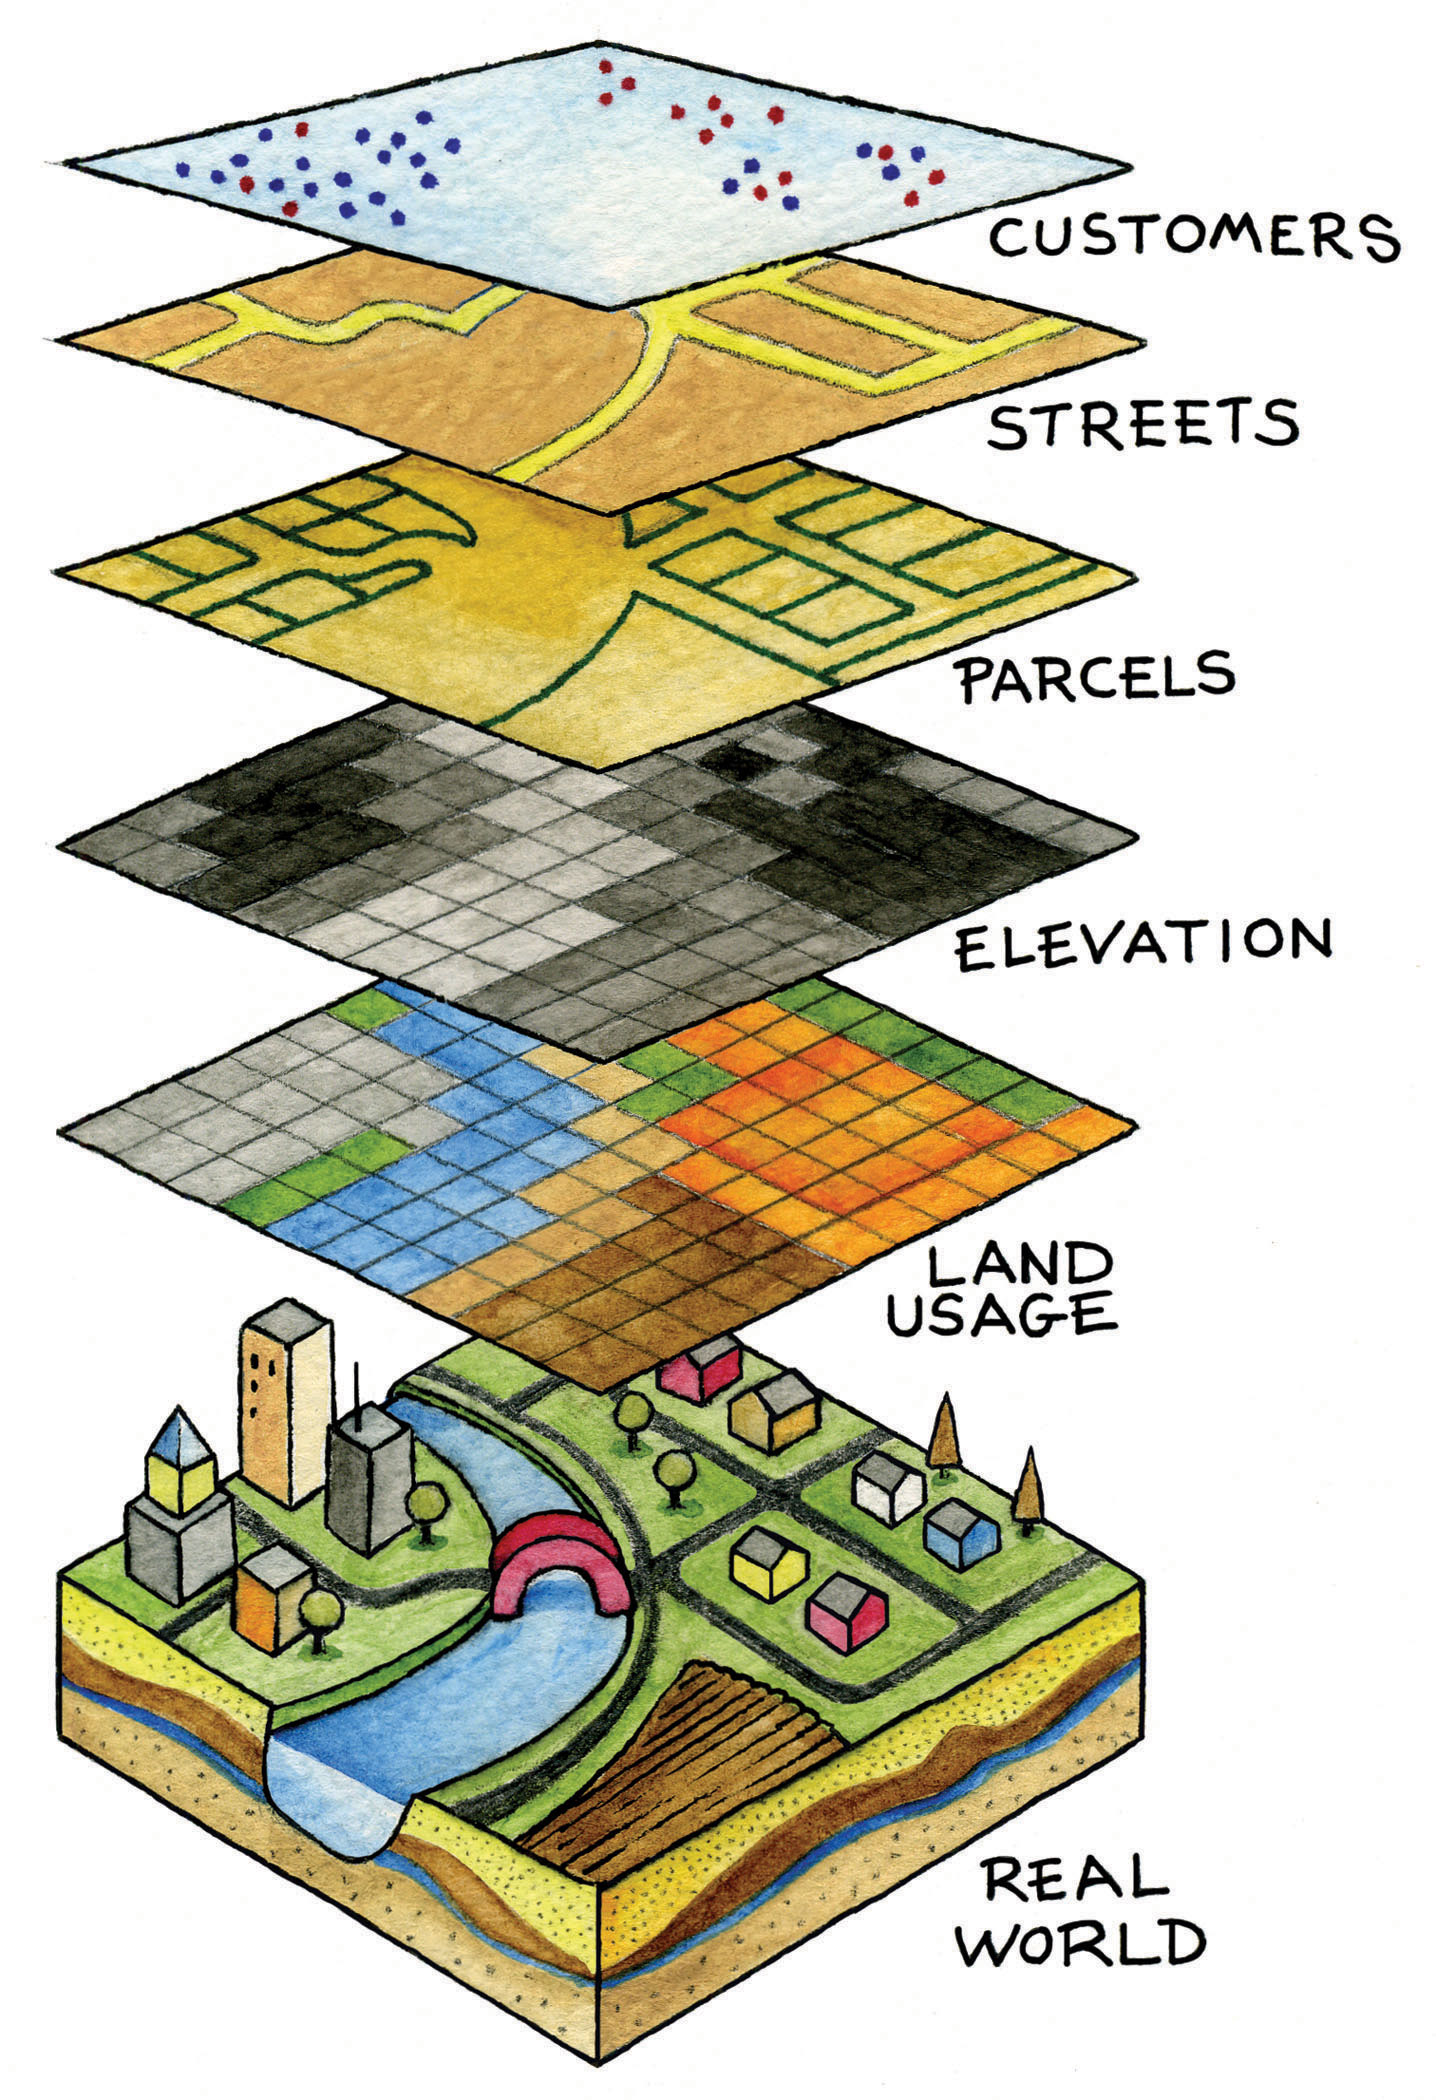 Cartoon image of GIS layers, each representing a different type of feature in the real world: customers as points, streets as lines, parcels as polygons, elevation as continuous raster data, and land usage as categorigal raster data, with the "real world" below them.